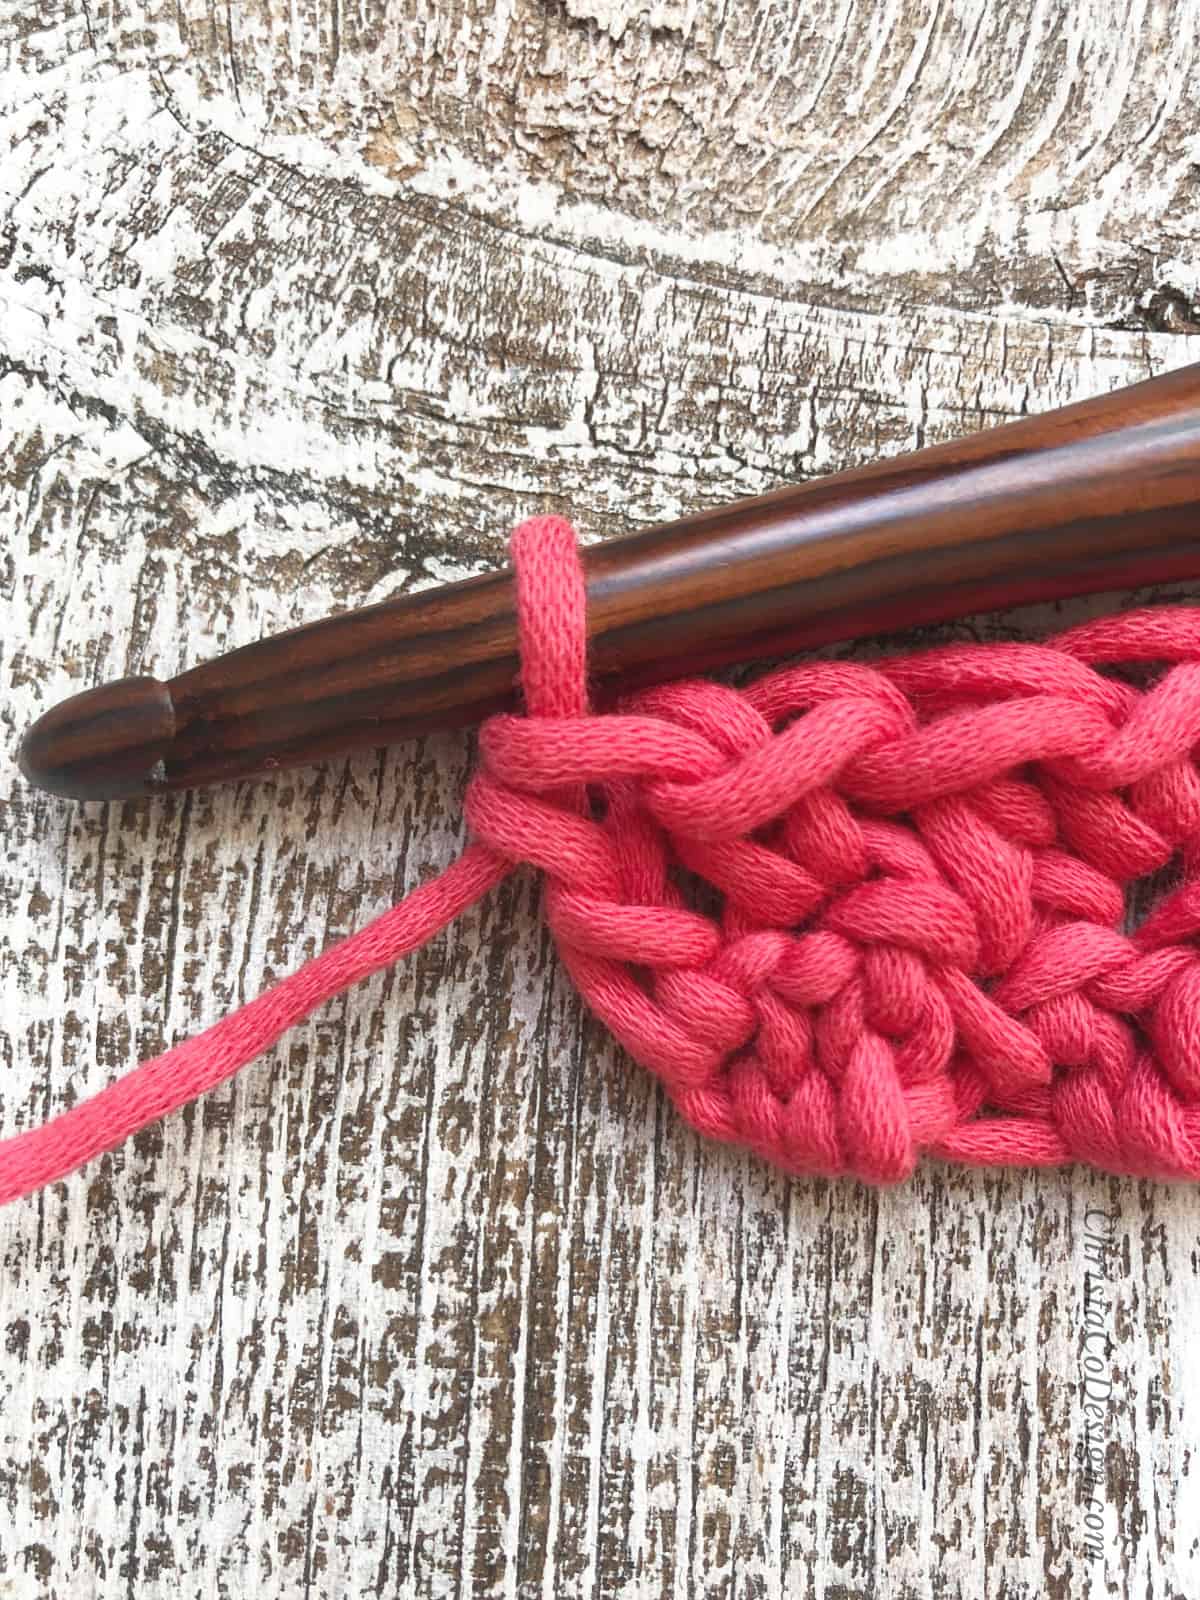 End of row 2 with double crochet in chain.